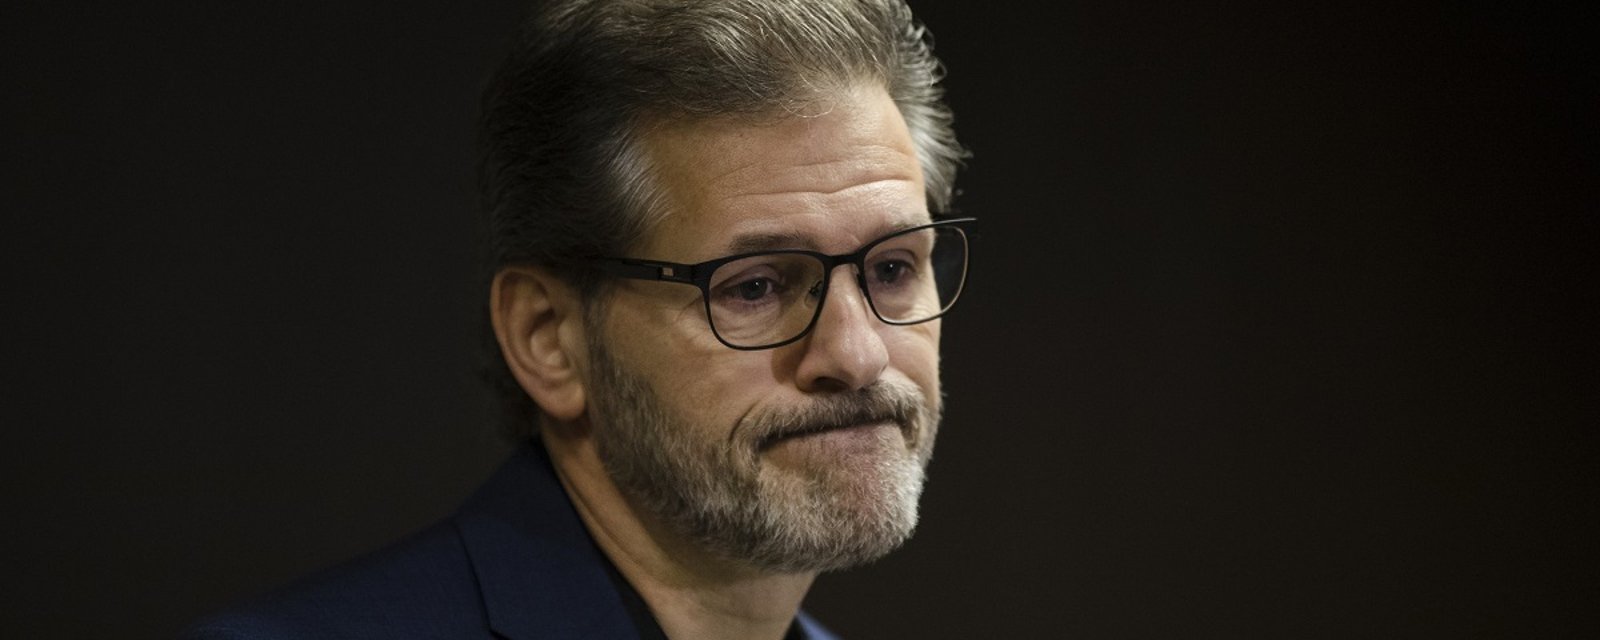 Rumor: There was much more to Hextall's firing than meets the eye.